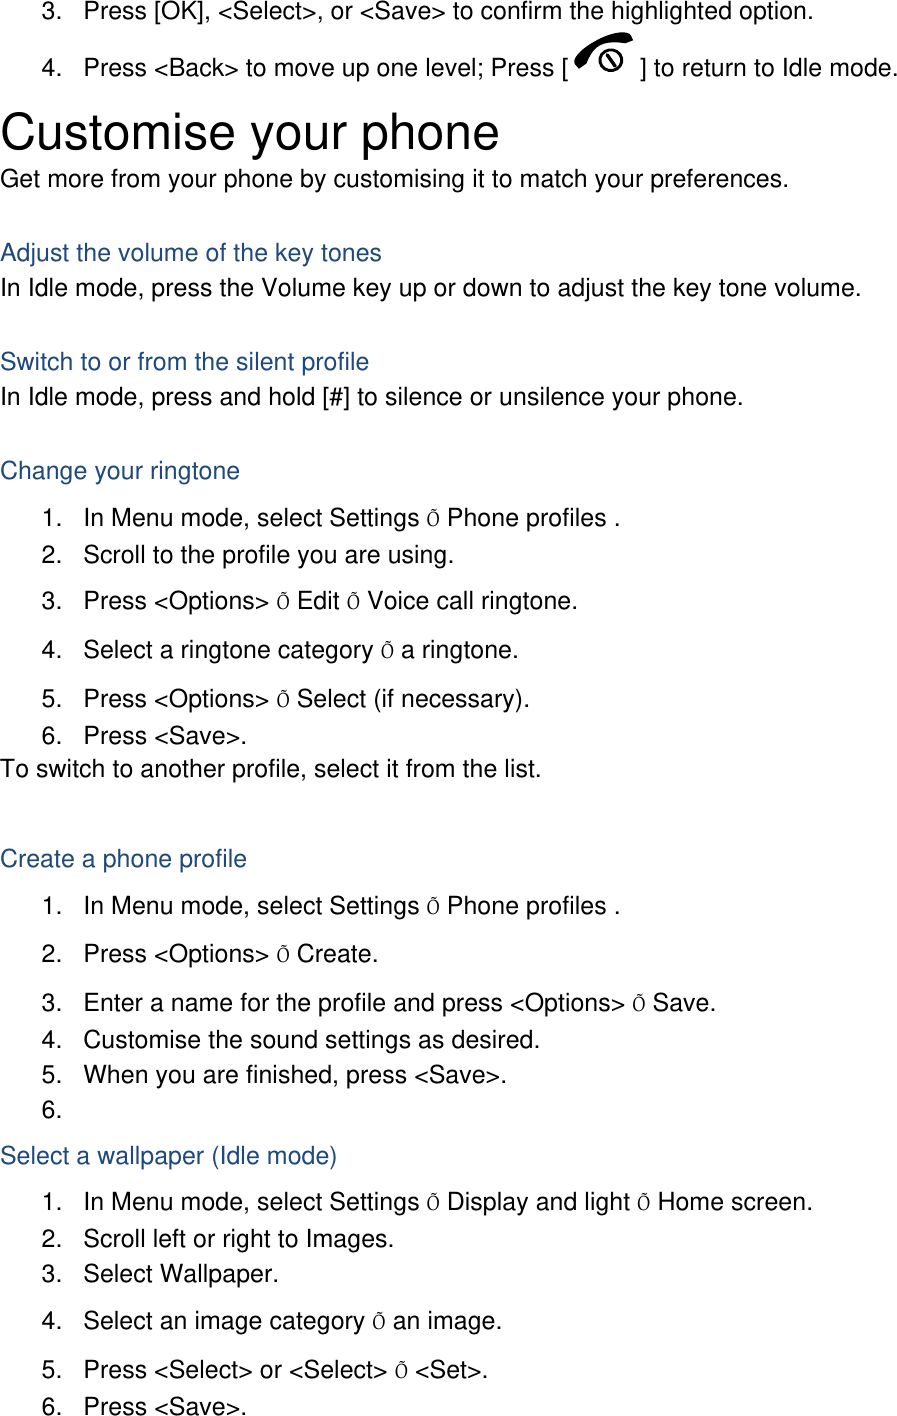 3.  Press [OK], &lt;Select&gt;, or &lt;Save&gt; to confirm the highlighted option. 4.  Press &lt;Back&gt; to move up one level; Press [ ] to return to Idle mode. Customise your phone Get more from your phone by customising it to match your preferences.  Adjust the volume of the key tones In Idle mode, press the Volume key up or down to adjust the key tone volume.  Switch to or from the silent profile In Idle mode, press and hold [#] to silence or unsilence your phone.  Change your ringtone 1.  In Menu mode, select Settings Õ Phone profiles . 2.  Scroll to the profile you are using. 3. Press &lt;Options&gt; Õ Edit Õ Voice call ringtone. 4.  Select a ringtone category Õ a ringtone. 5. Press &lt;Options&gt; Õ Select (if necessary). 6. Press &lt;Save&gt;. To switch to another profile, select it from the list.  Create a phone profile 1.  In Menu mode, select Settings Õ Phone profiles . 2. Press &lt;Options&gt; Õ Create. 3.  Enter a name for the profile and press &lt;Options&gt; Õ Save. 4.  Customise the sound settings as desired. 5.  When you are finished, press &lt;Save&gt;. 6.  Select a wallpaper (Idle mode) 1.  In Menu mode, select Settings Õ Display and light Õ Home screen. 2.  Scroll left or right to Images. 3. Select Wallpaper. 4.  Select an image category Õ an image. 5.  Press &lt;Select&gt; or &lt;Select&gt; Õ &lt;Set&gt;. 6. Press &lt;Save&gt;. 